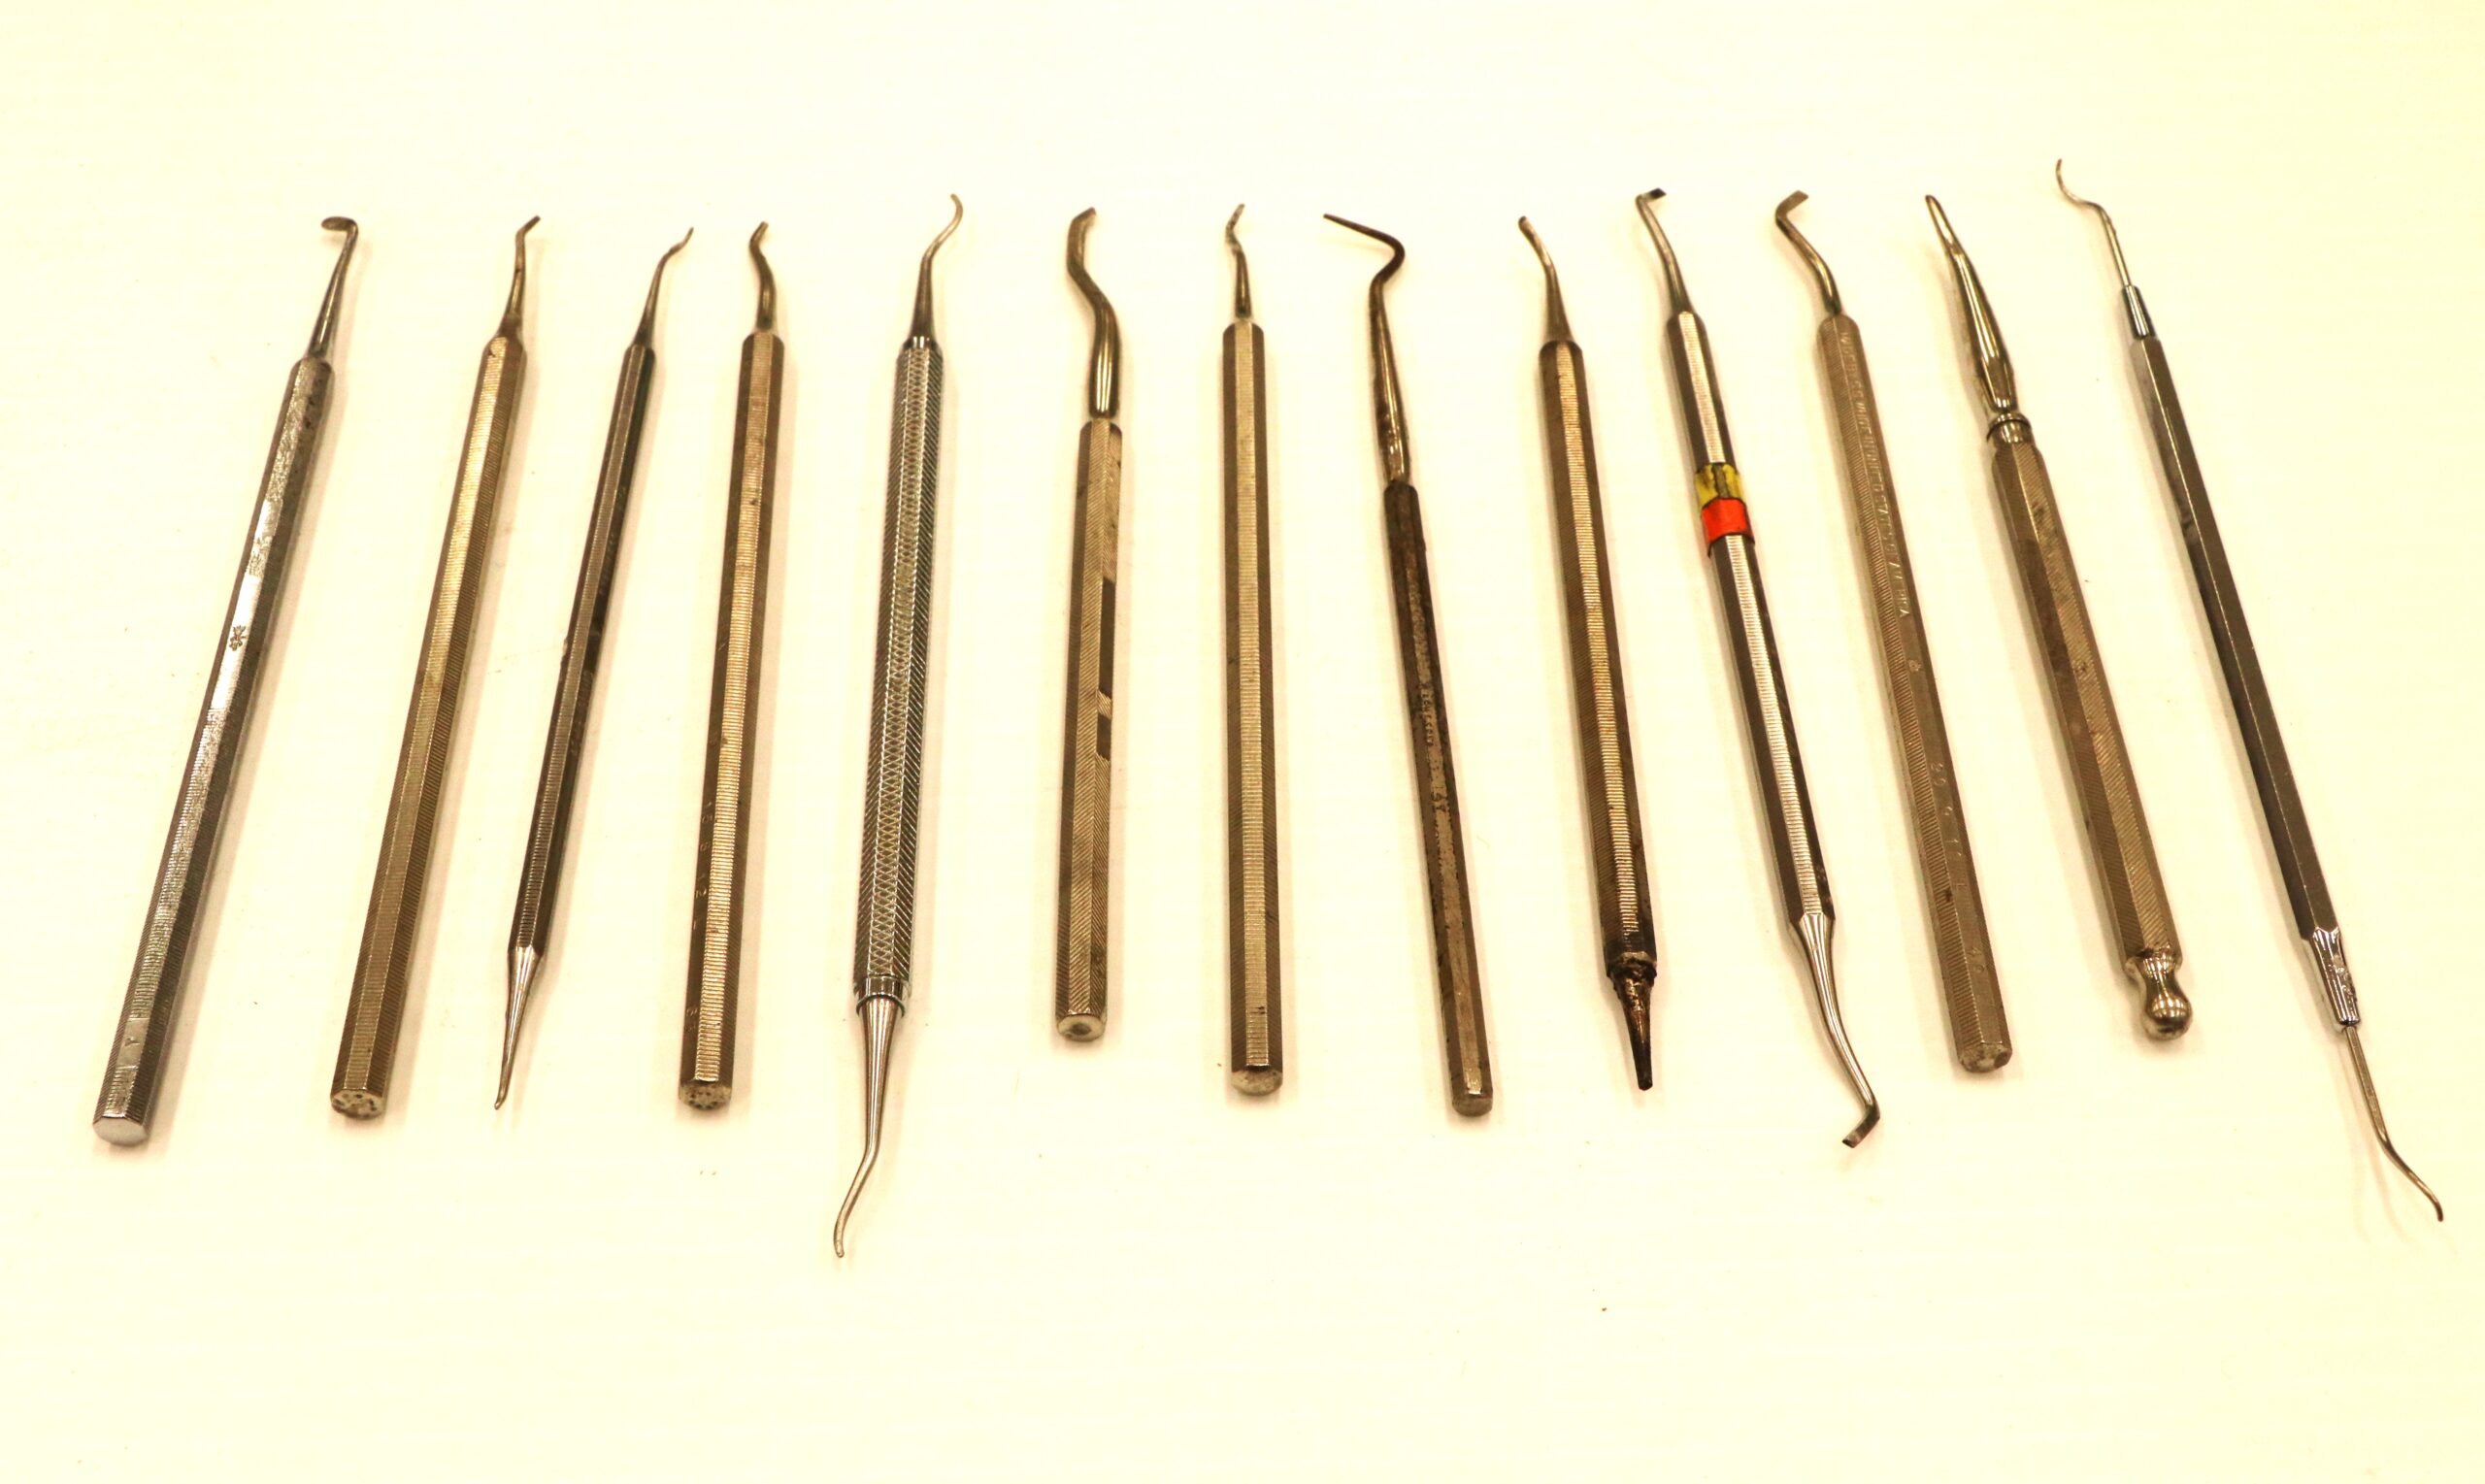 Image of thirteen dental tools laid out evenly in a row. Tools are composed of stainless steel and have various tips on both ends